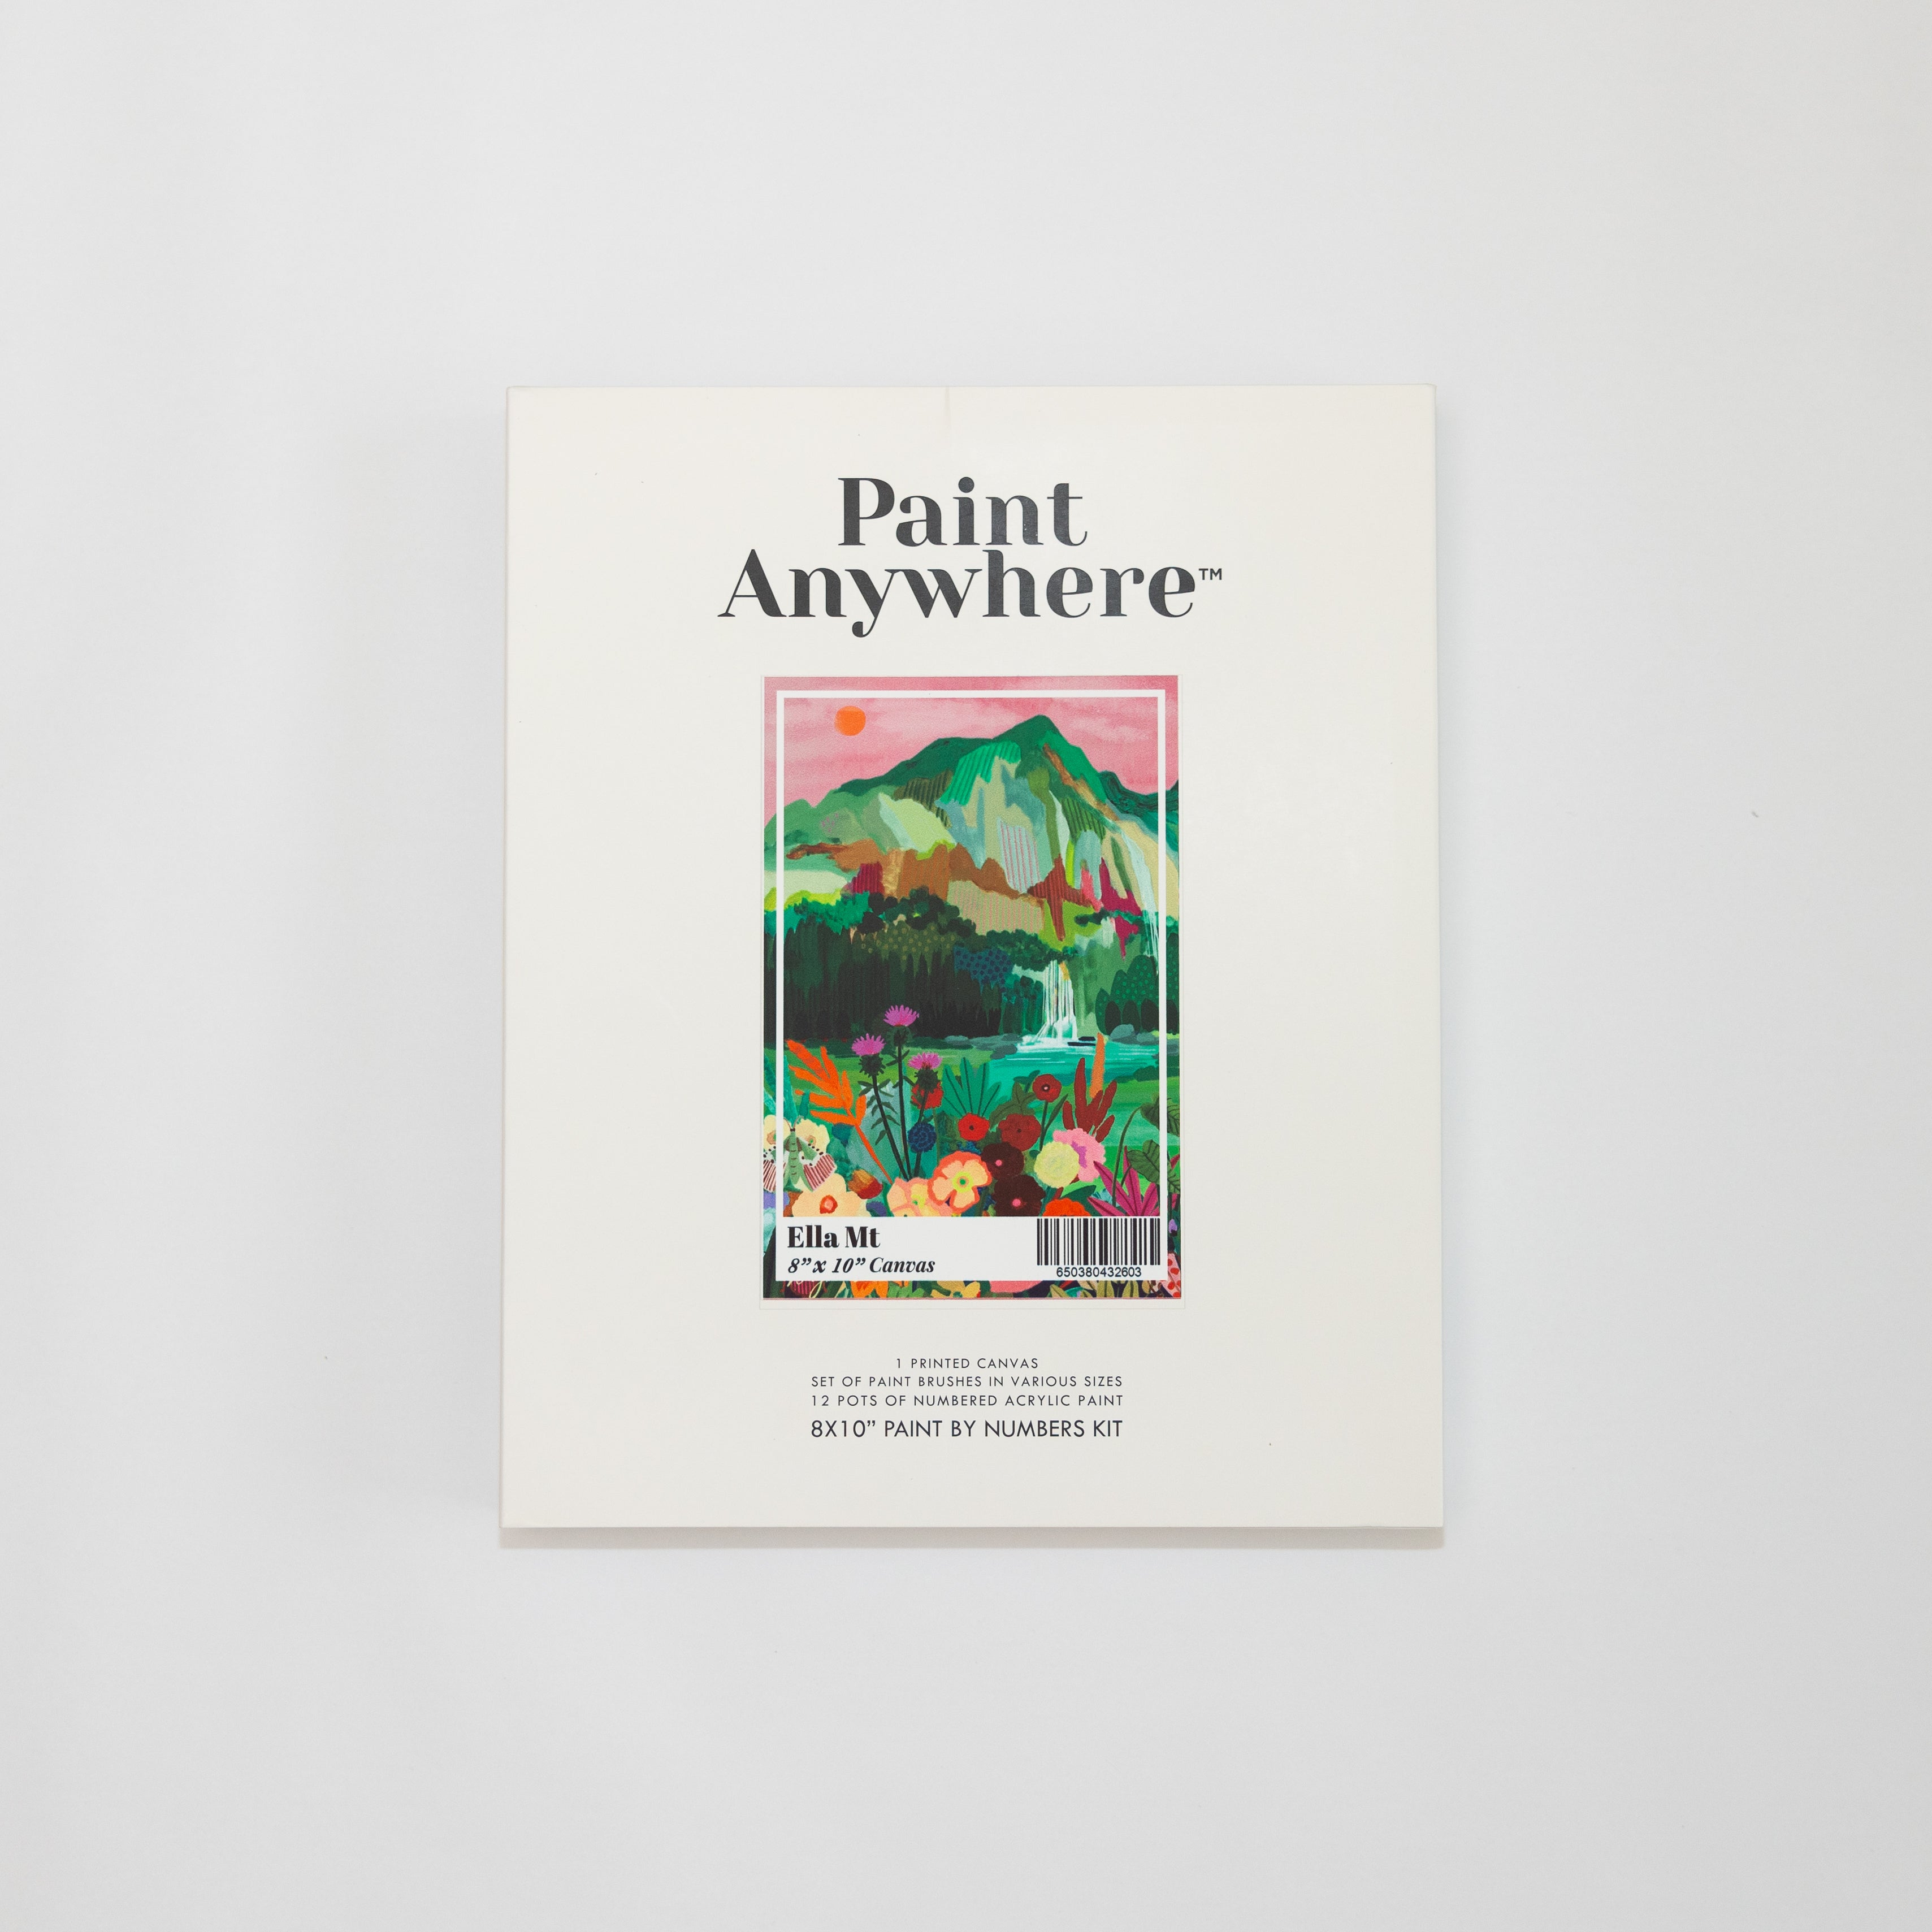 Mountainscape | Paint-by-Number Kit for Adults — Elle Crée (she creates)